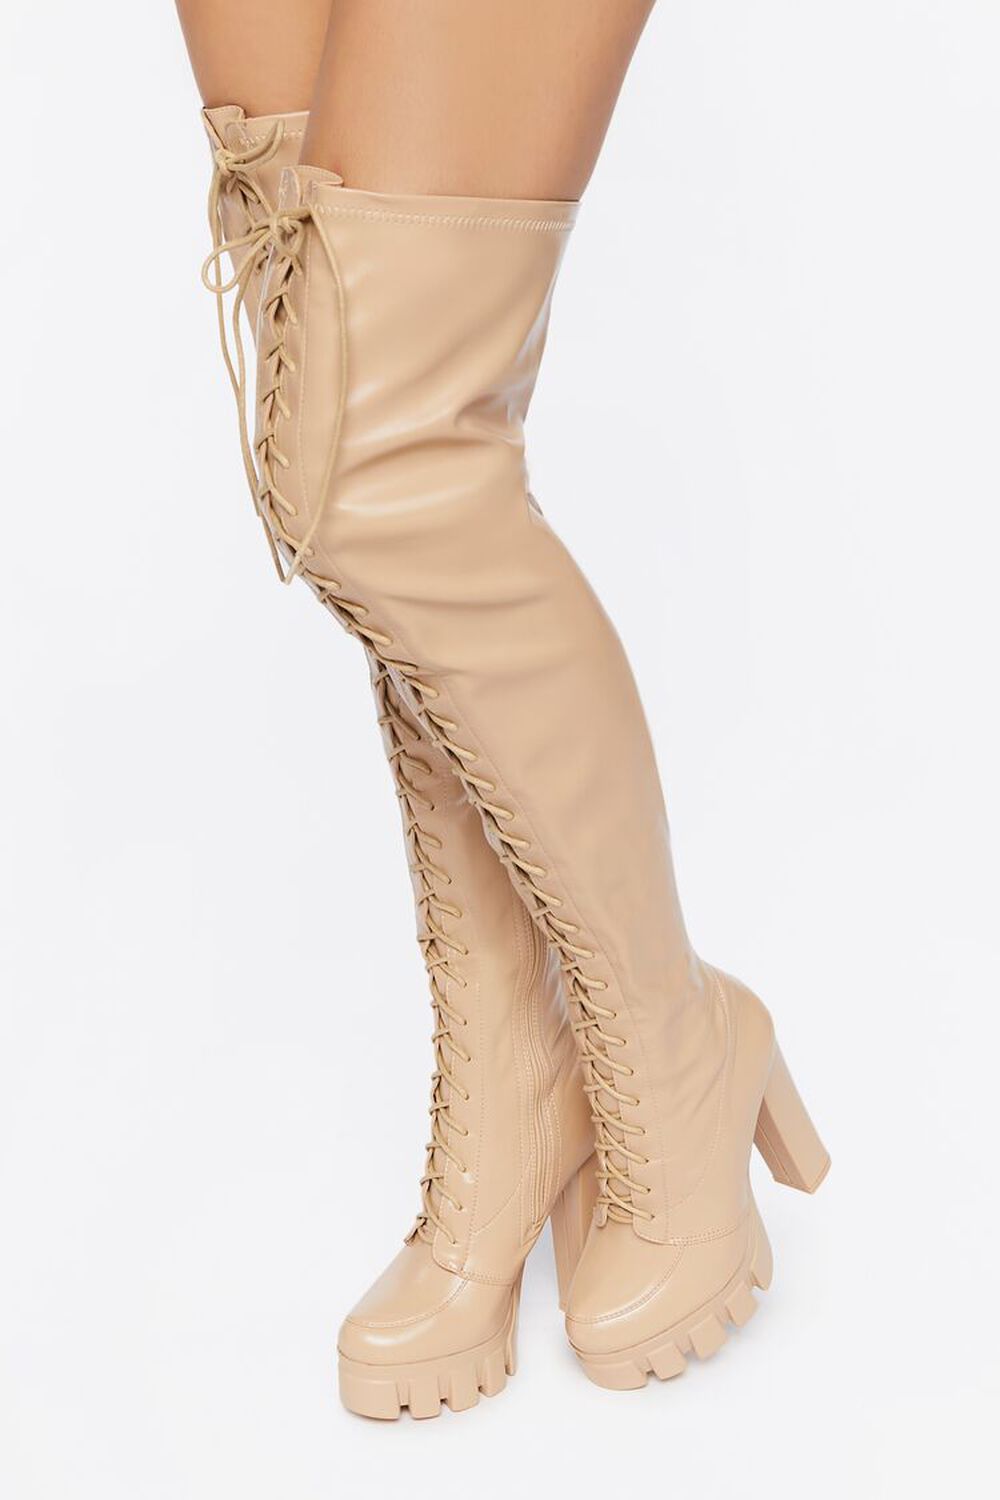 NUDE Lace Up Over-the-Knee Boots, image 1